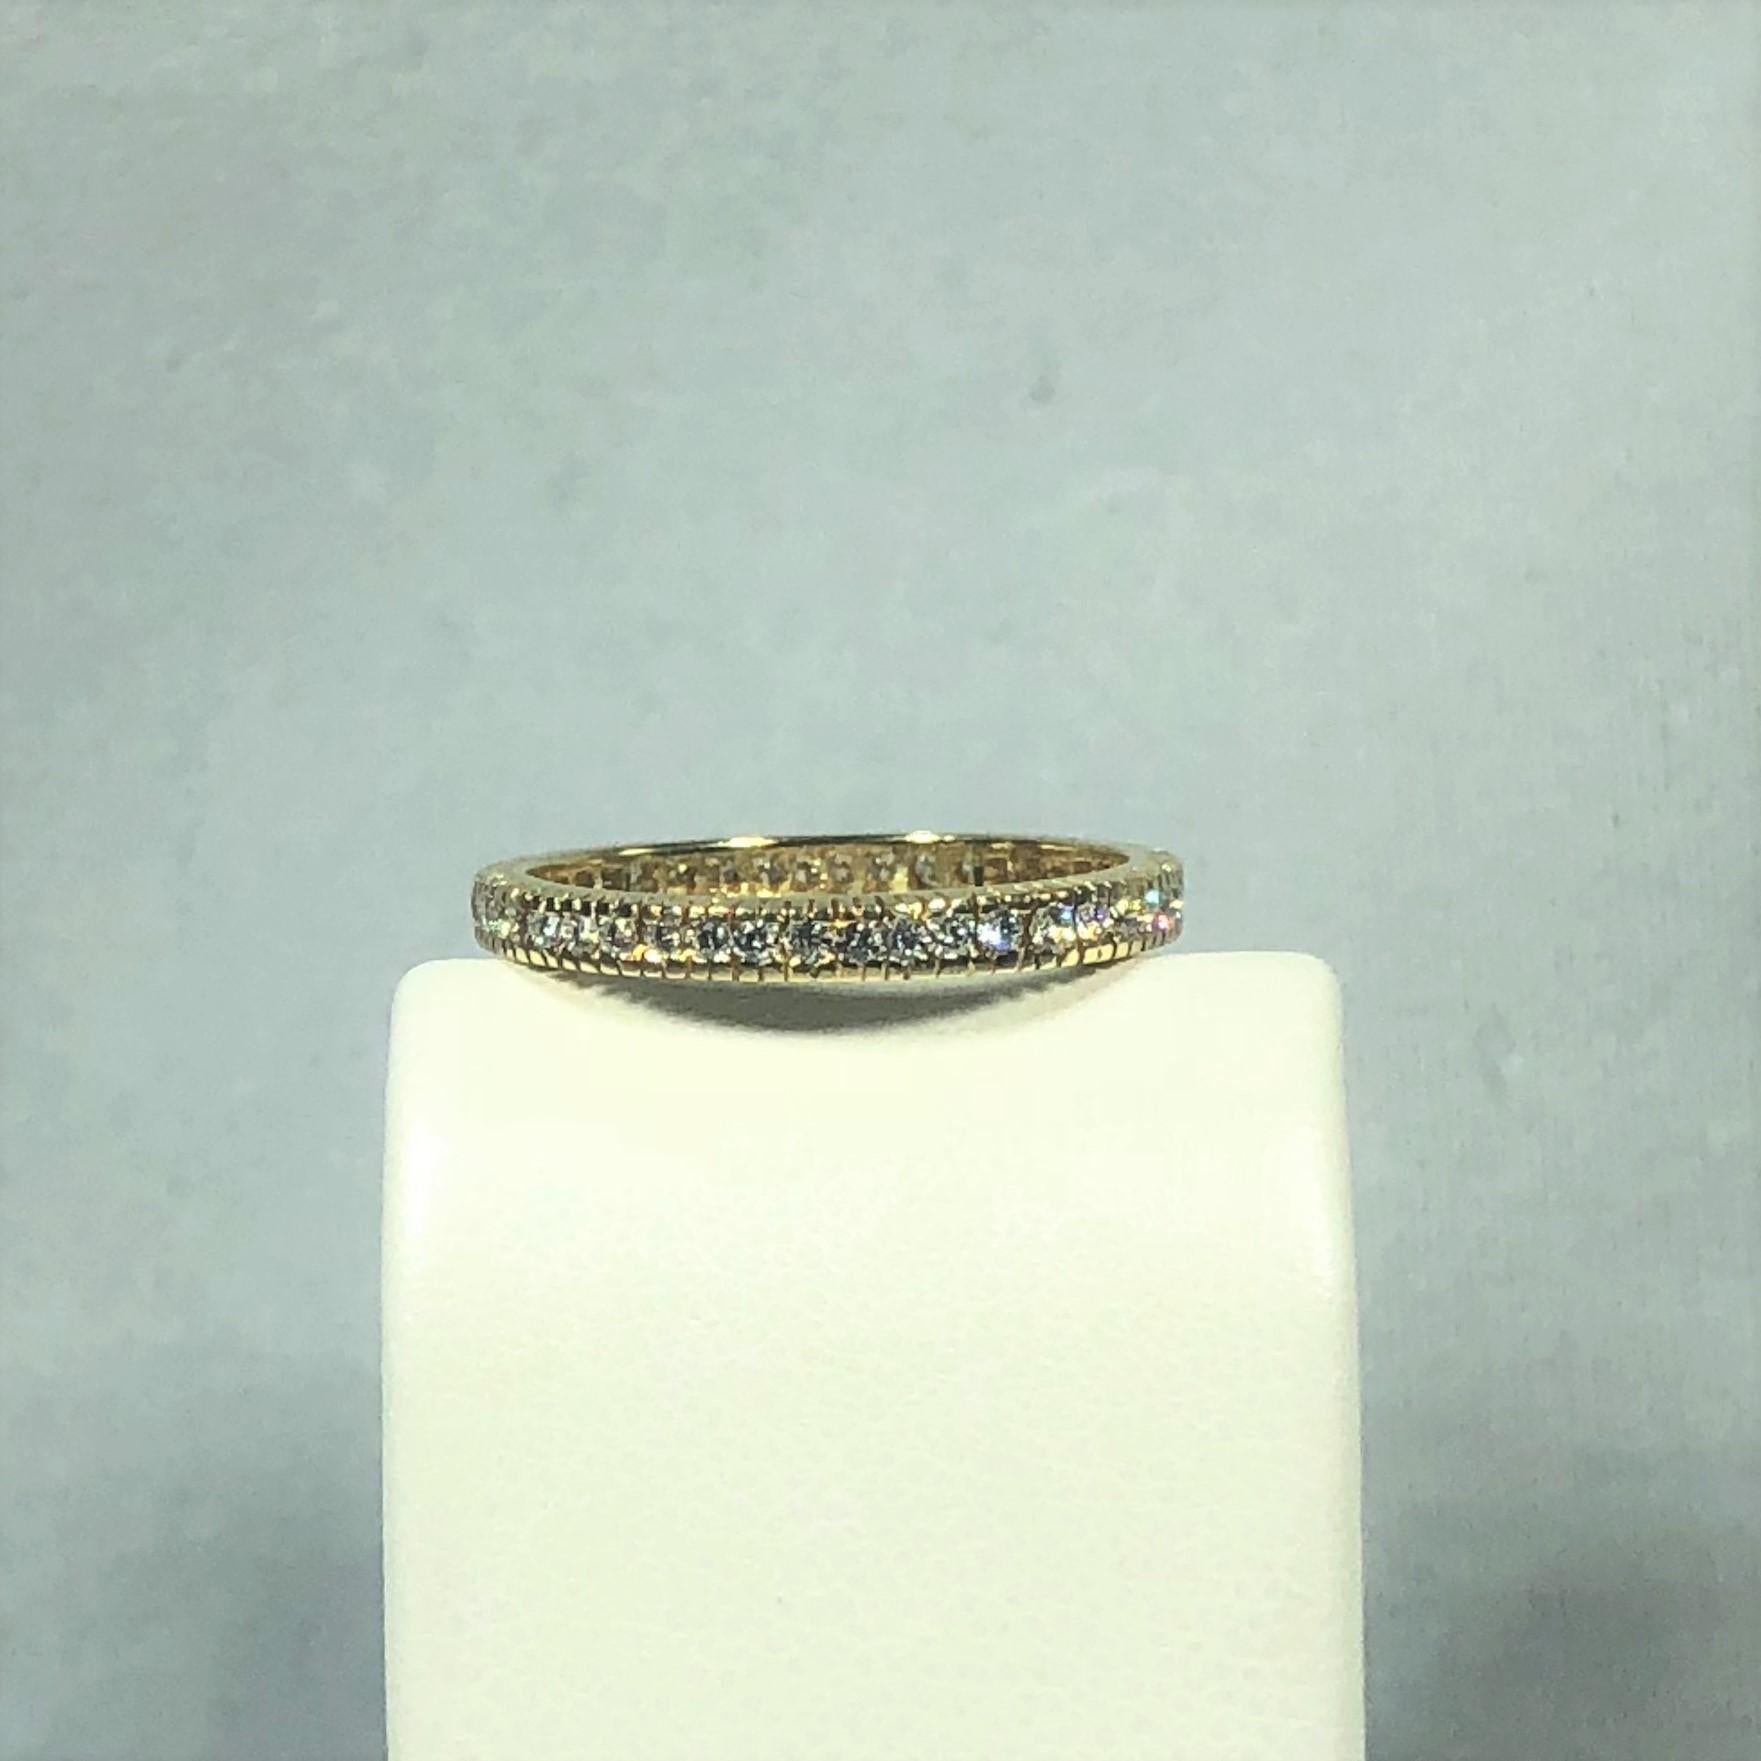 Hidalgo 18 Karat Yellow Gold and Diamond Eternity Band. This Hidalgo piece is created in 18 karat yellow gold, weight 1.7 grams. 45 channel set  1.5mm diamonds are around the entire band, in eternity style fashion. Total carat weight =.46 ct.,